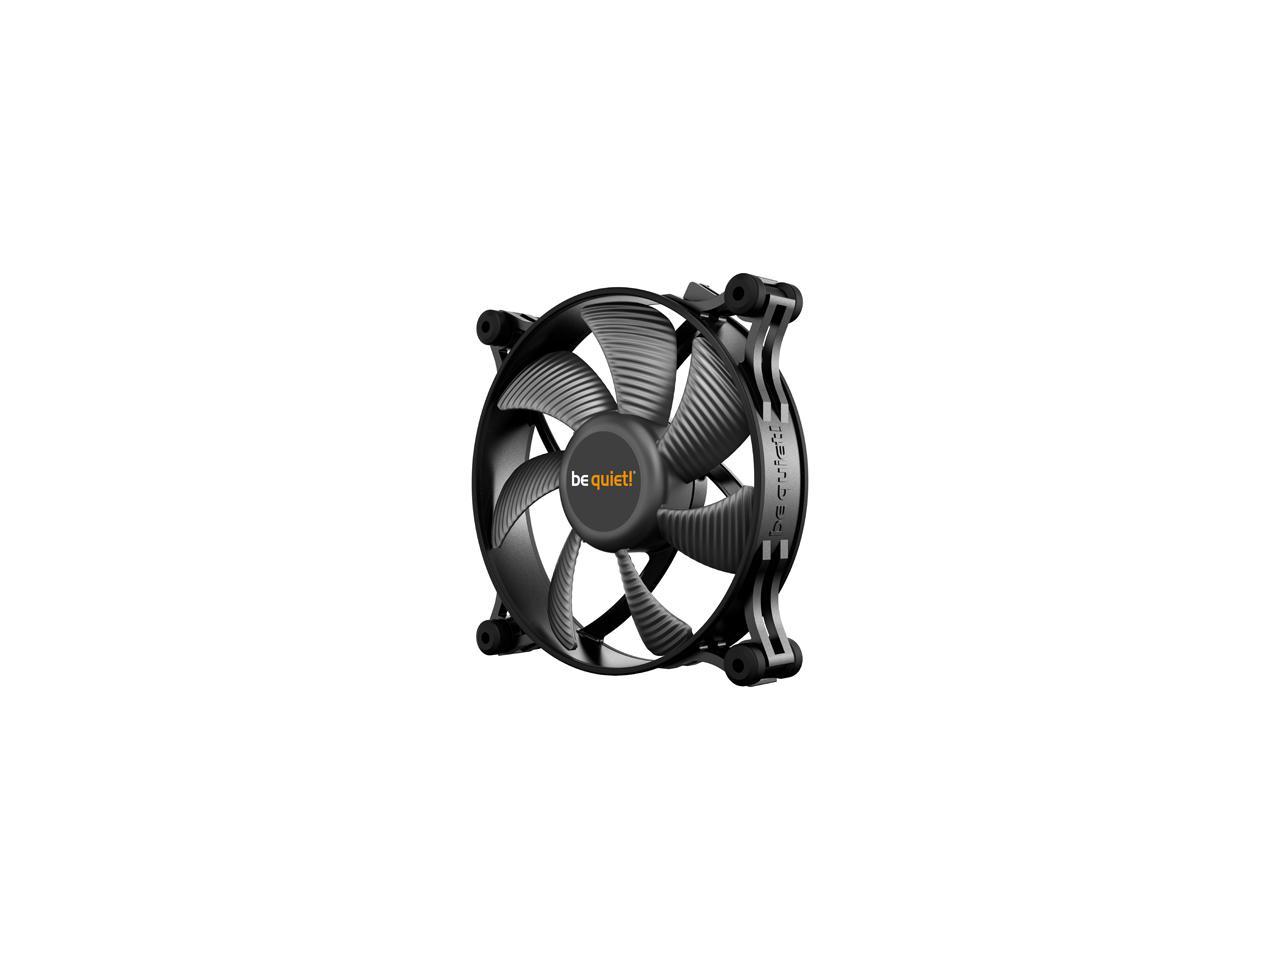 be quiet! Shadow Wings 2 120mm, Airflow-optimized Fan Blades, Whisper-quiet Operation and Reliable Cooling